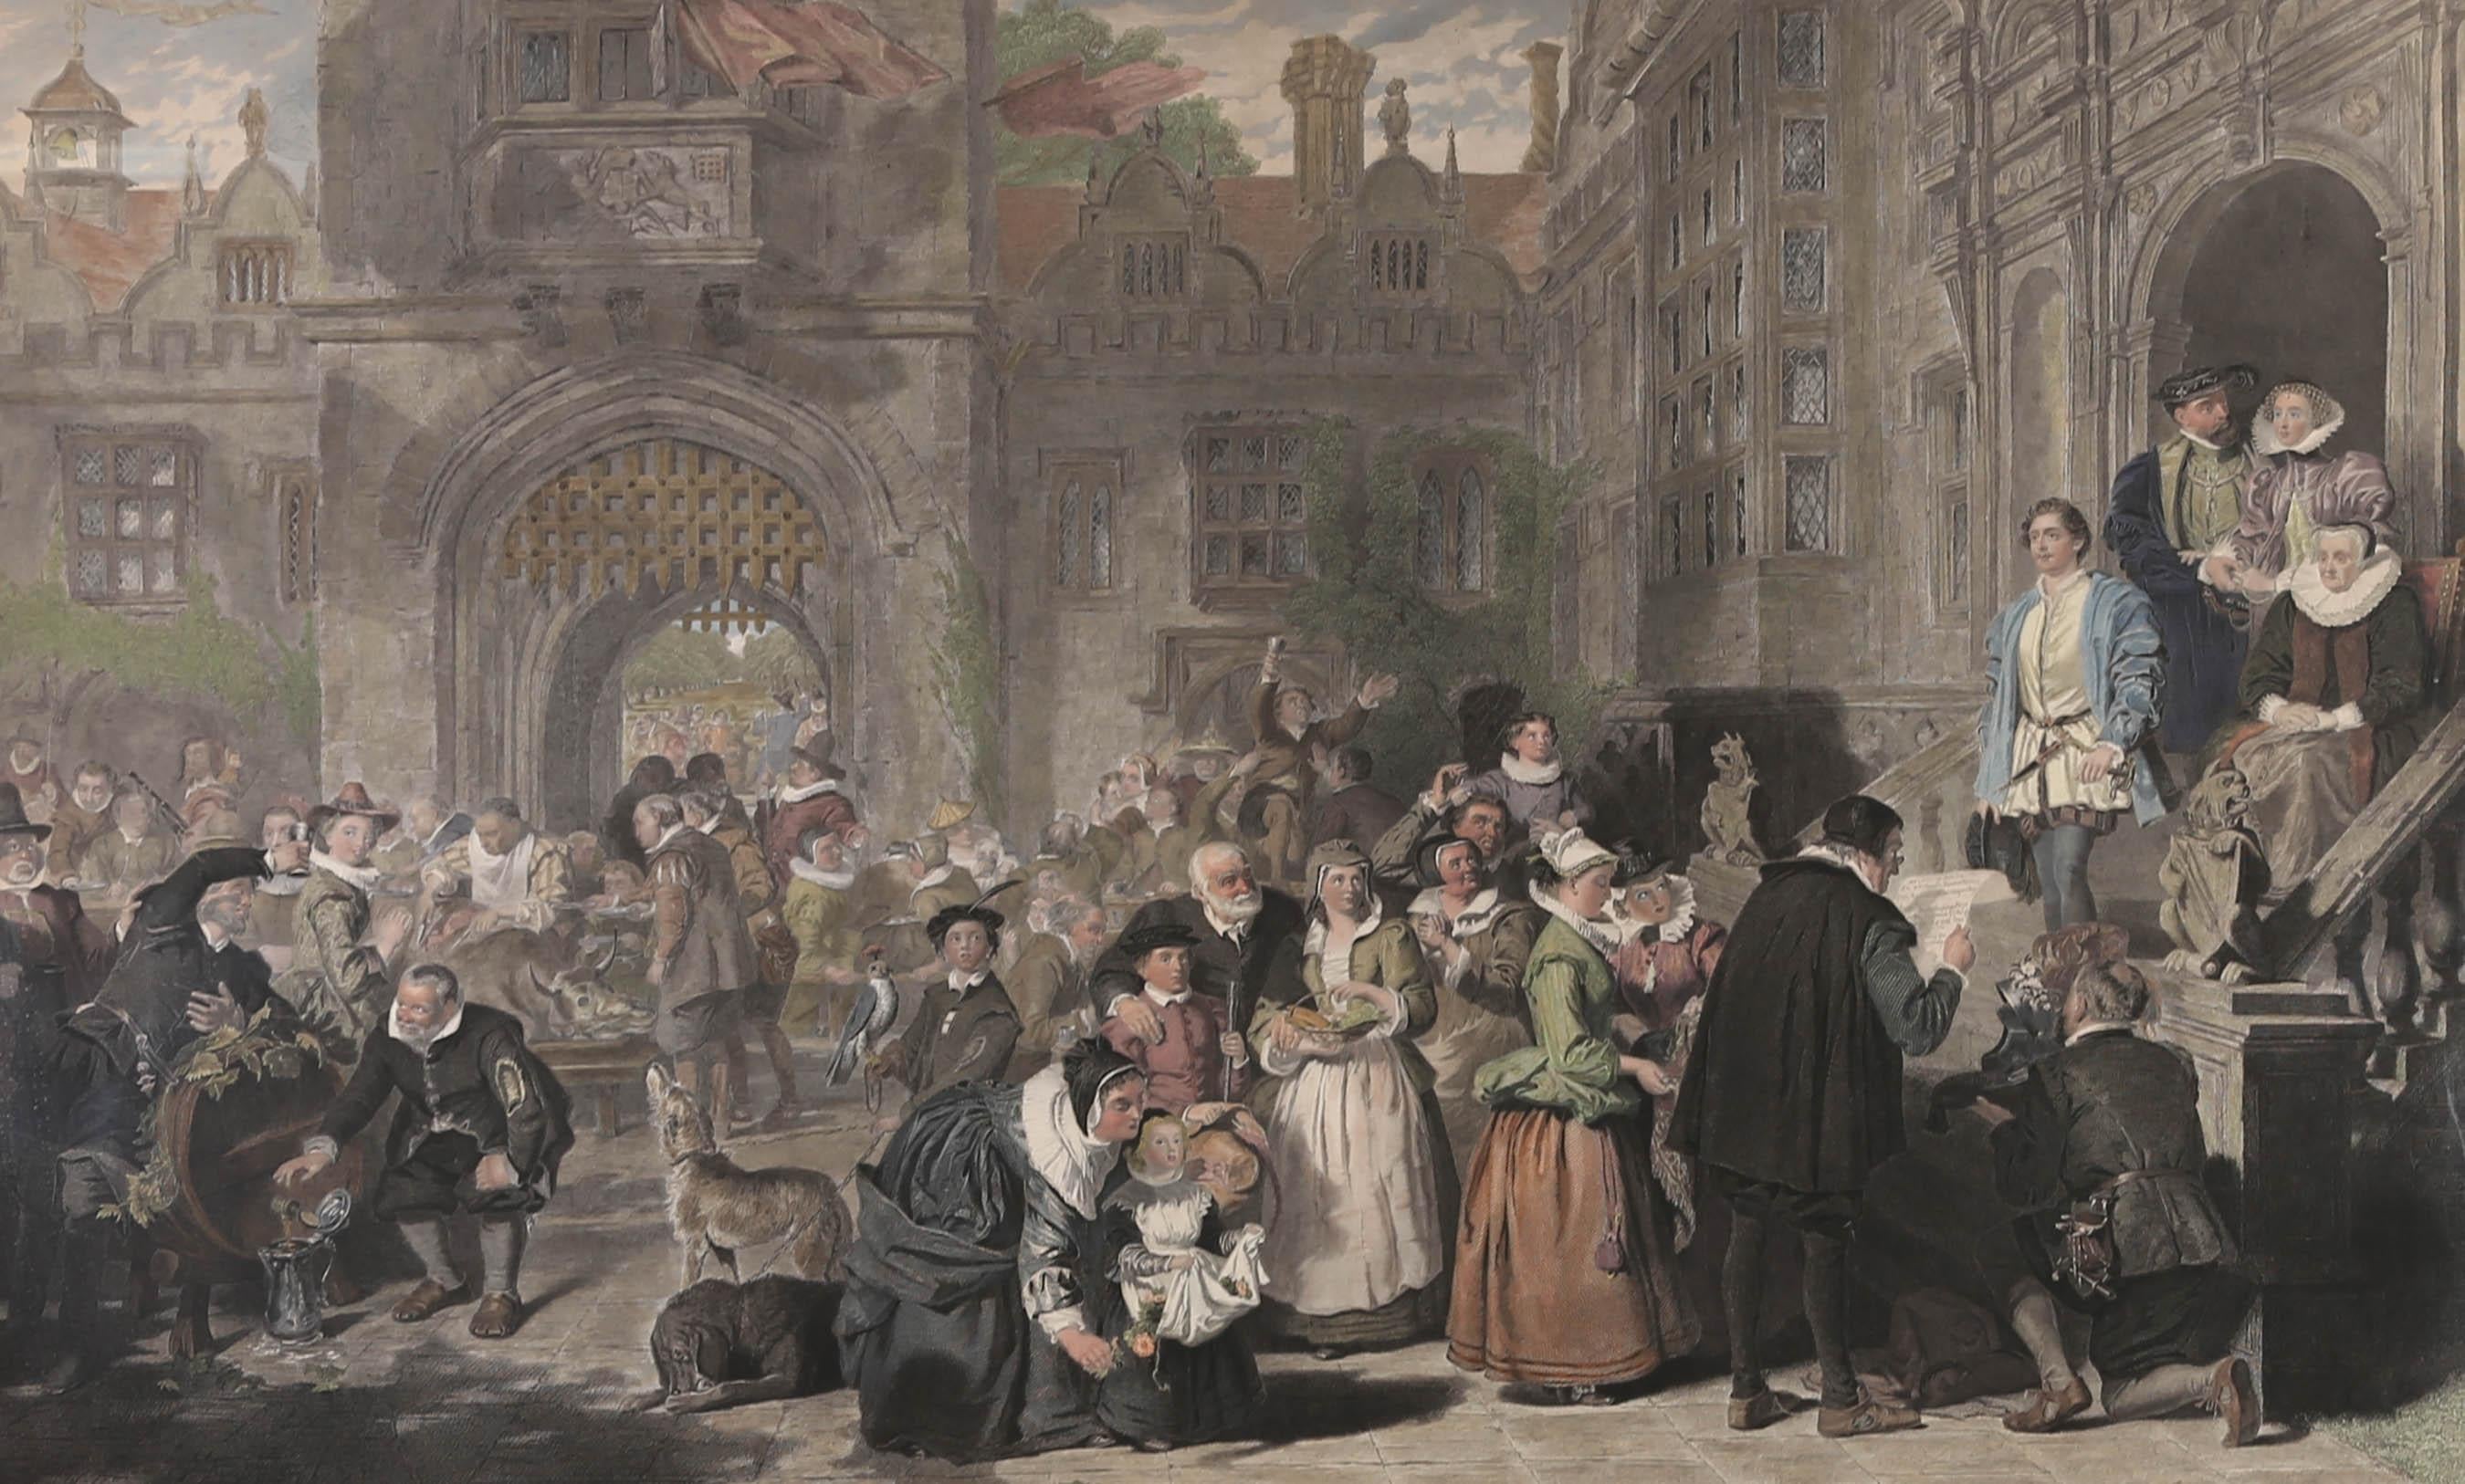 A fine 19th Century strike of the etching by Francis Holl Francis Holl, ARA (1815–1884) after the original painting by William Powell Frith, R.A. (1819-1909). A crowded scene in a courtyard with figures in Tudor dress drinking and feasting, others